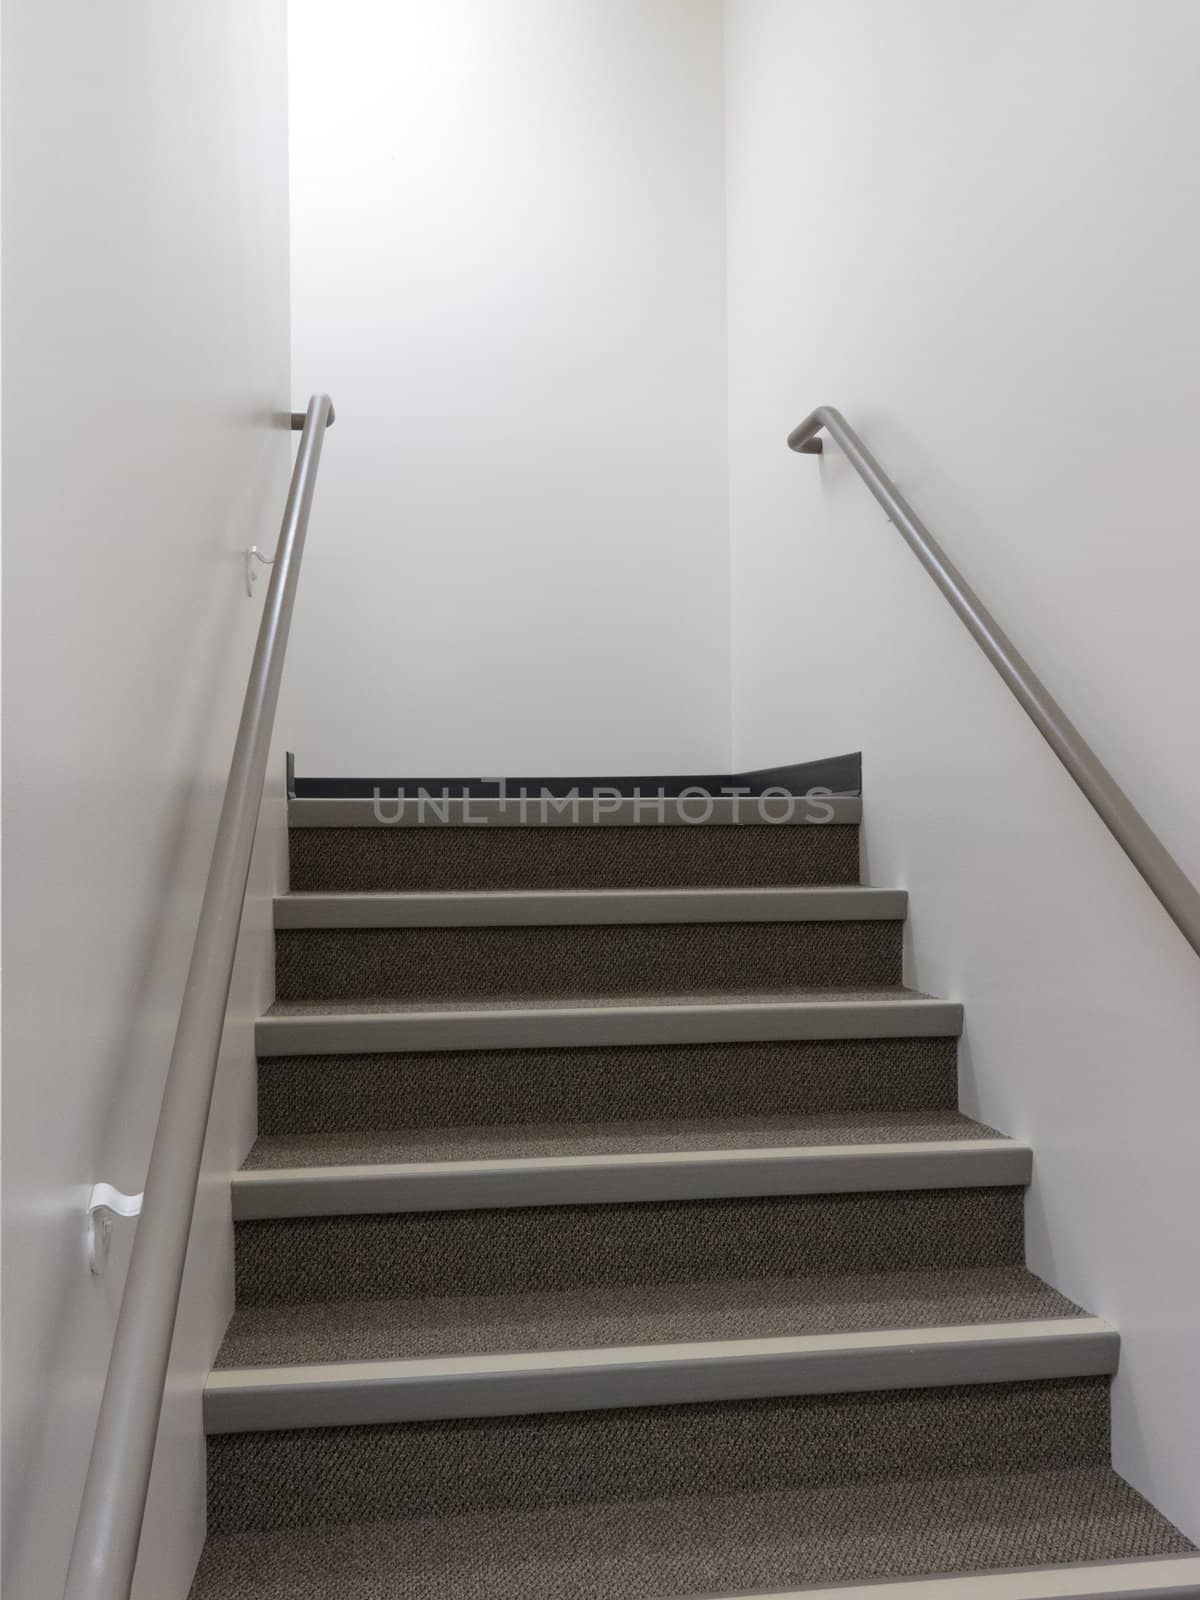 Looking up a flight of stairs in a well lit building with safety bannisters on either side